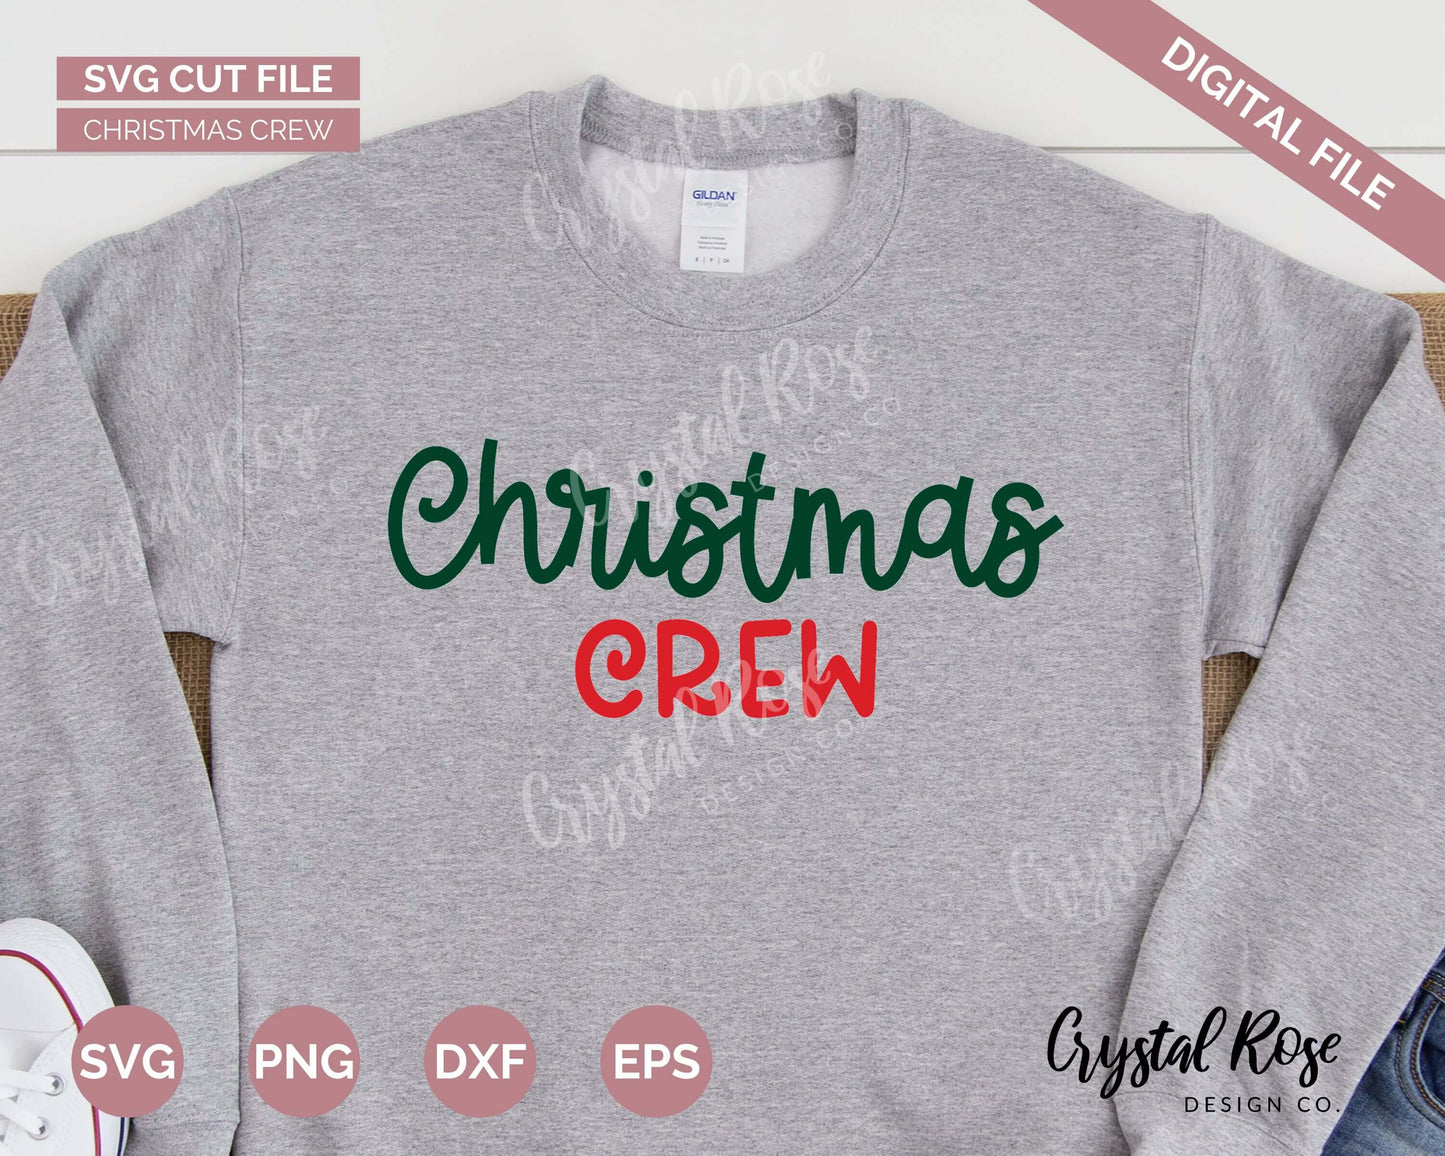 Christmas Crew SVG, Digital Download, Cricut, Silhouette, Glowforge (includes svg/png/dxf/eps)